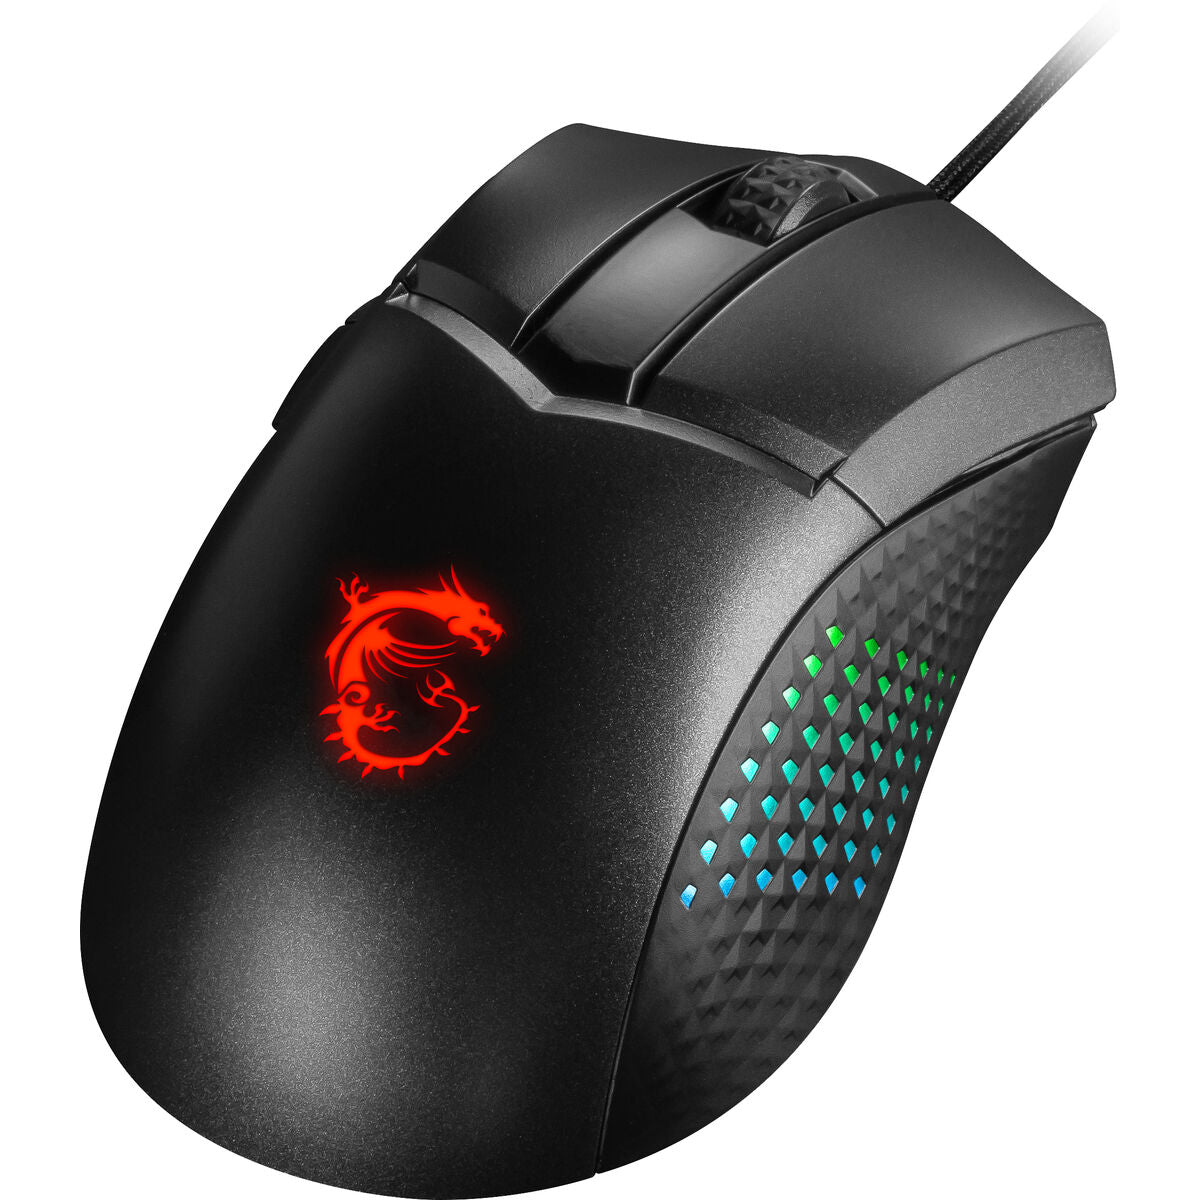 Mouse MSI CLUTCH GM51 LIGHTWEIGHT, MSI, Computing, Accessories, mouse-msi-clutch-gm51-lightweight, Brand_MSI, category-reference-2609, category-reference-2642, category-reference-2656, category-reference-t-19685, category-reference-t-19908, category-reference-t-21353, computers / peripherals, Condition_NEW, office, Price_50 - 100, Teleworking, RiotNook